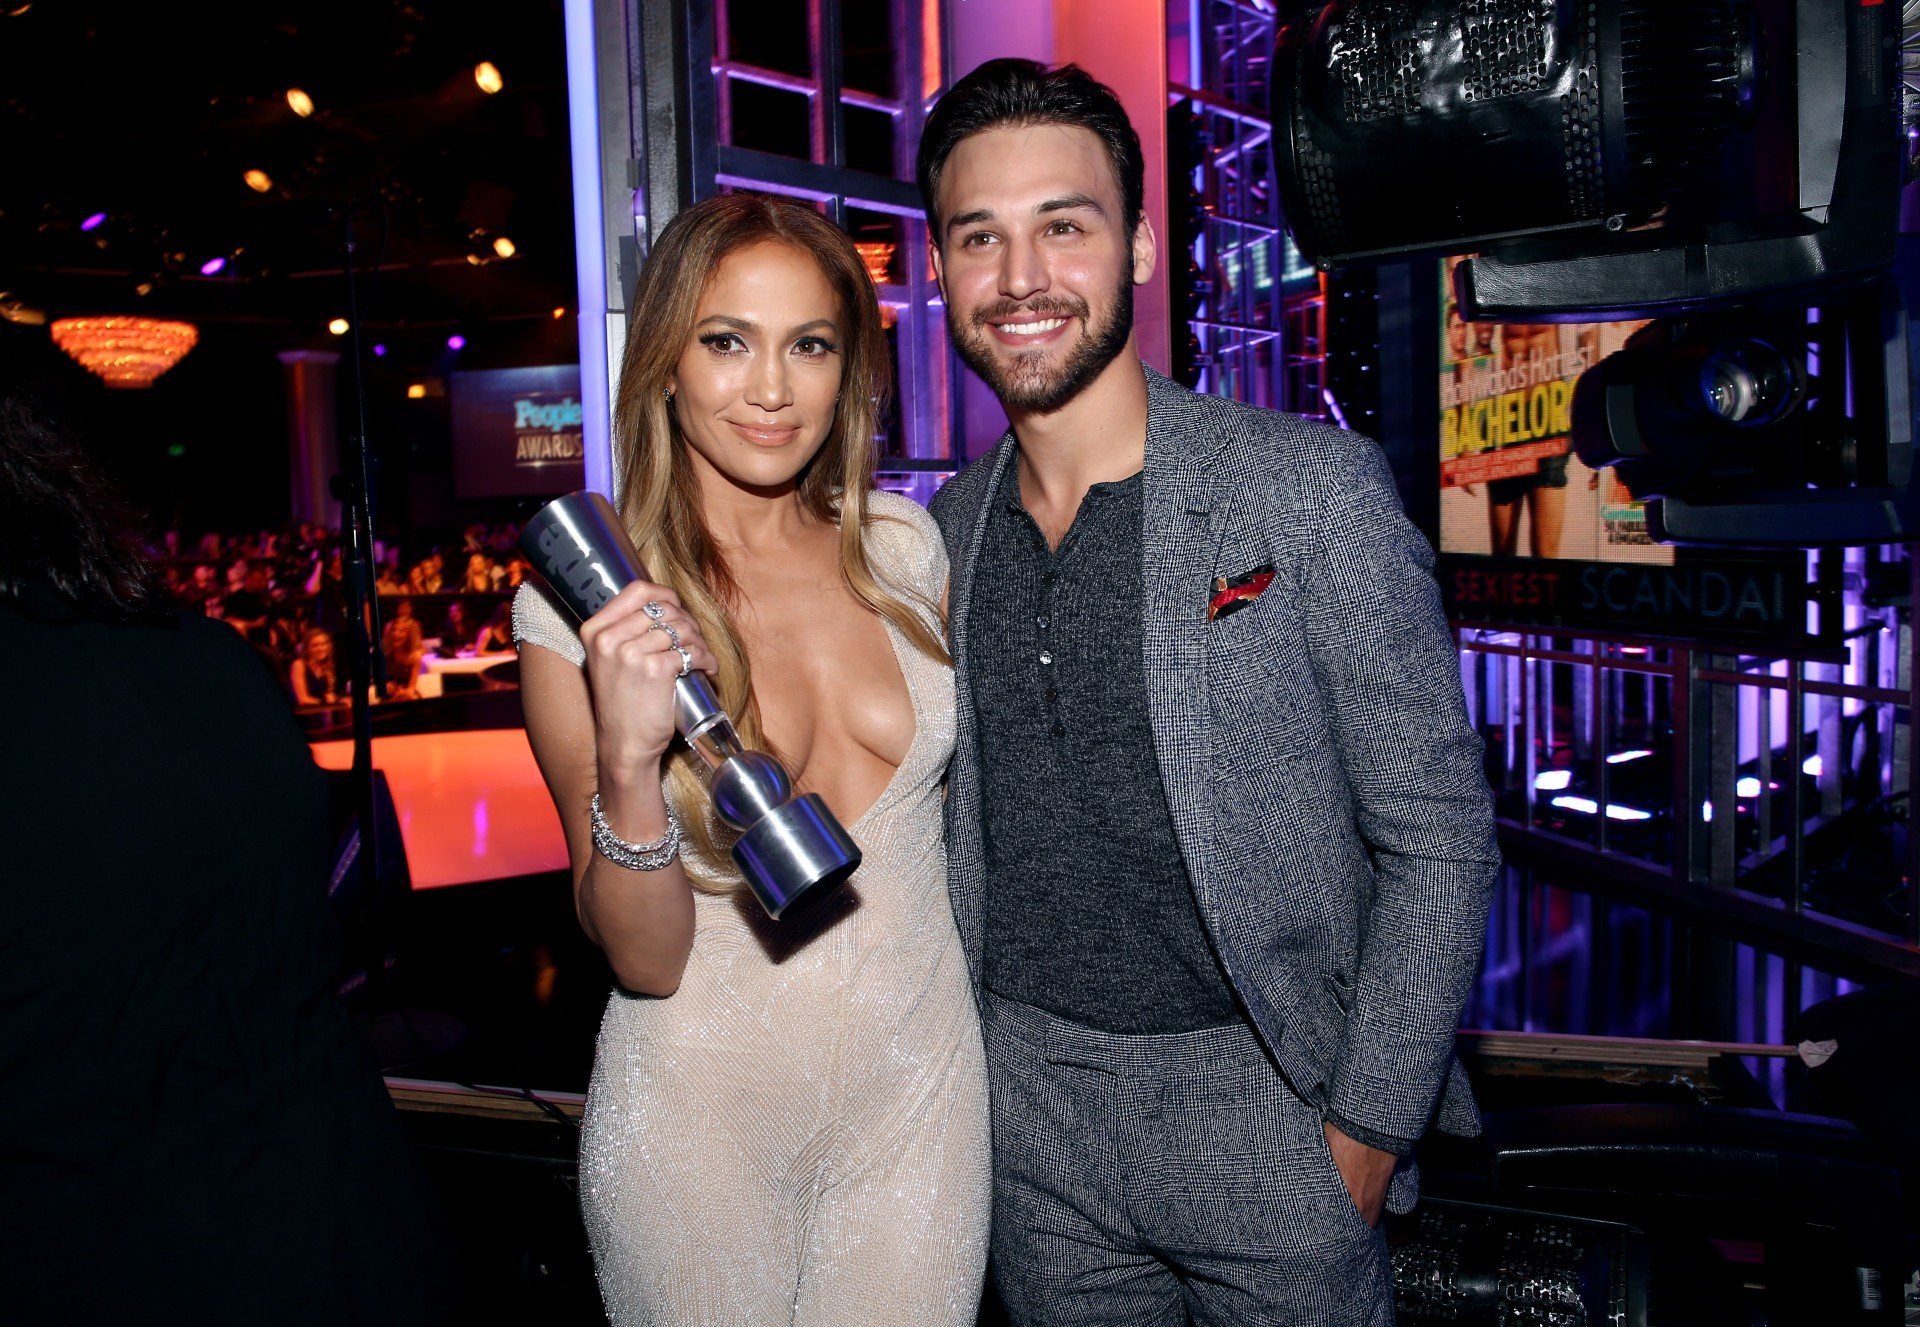 Jennifer Lopez and Ryan Guzman stand next to each other and smile